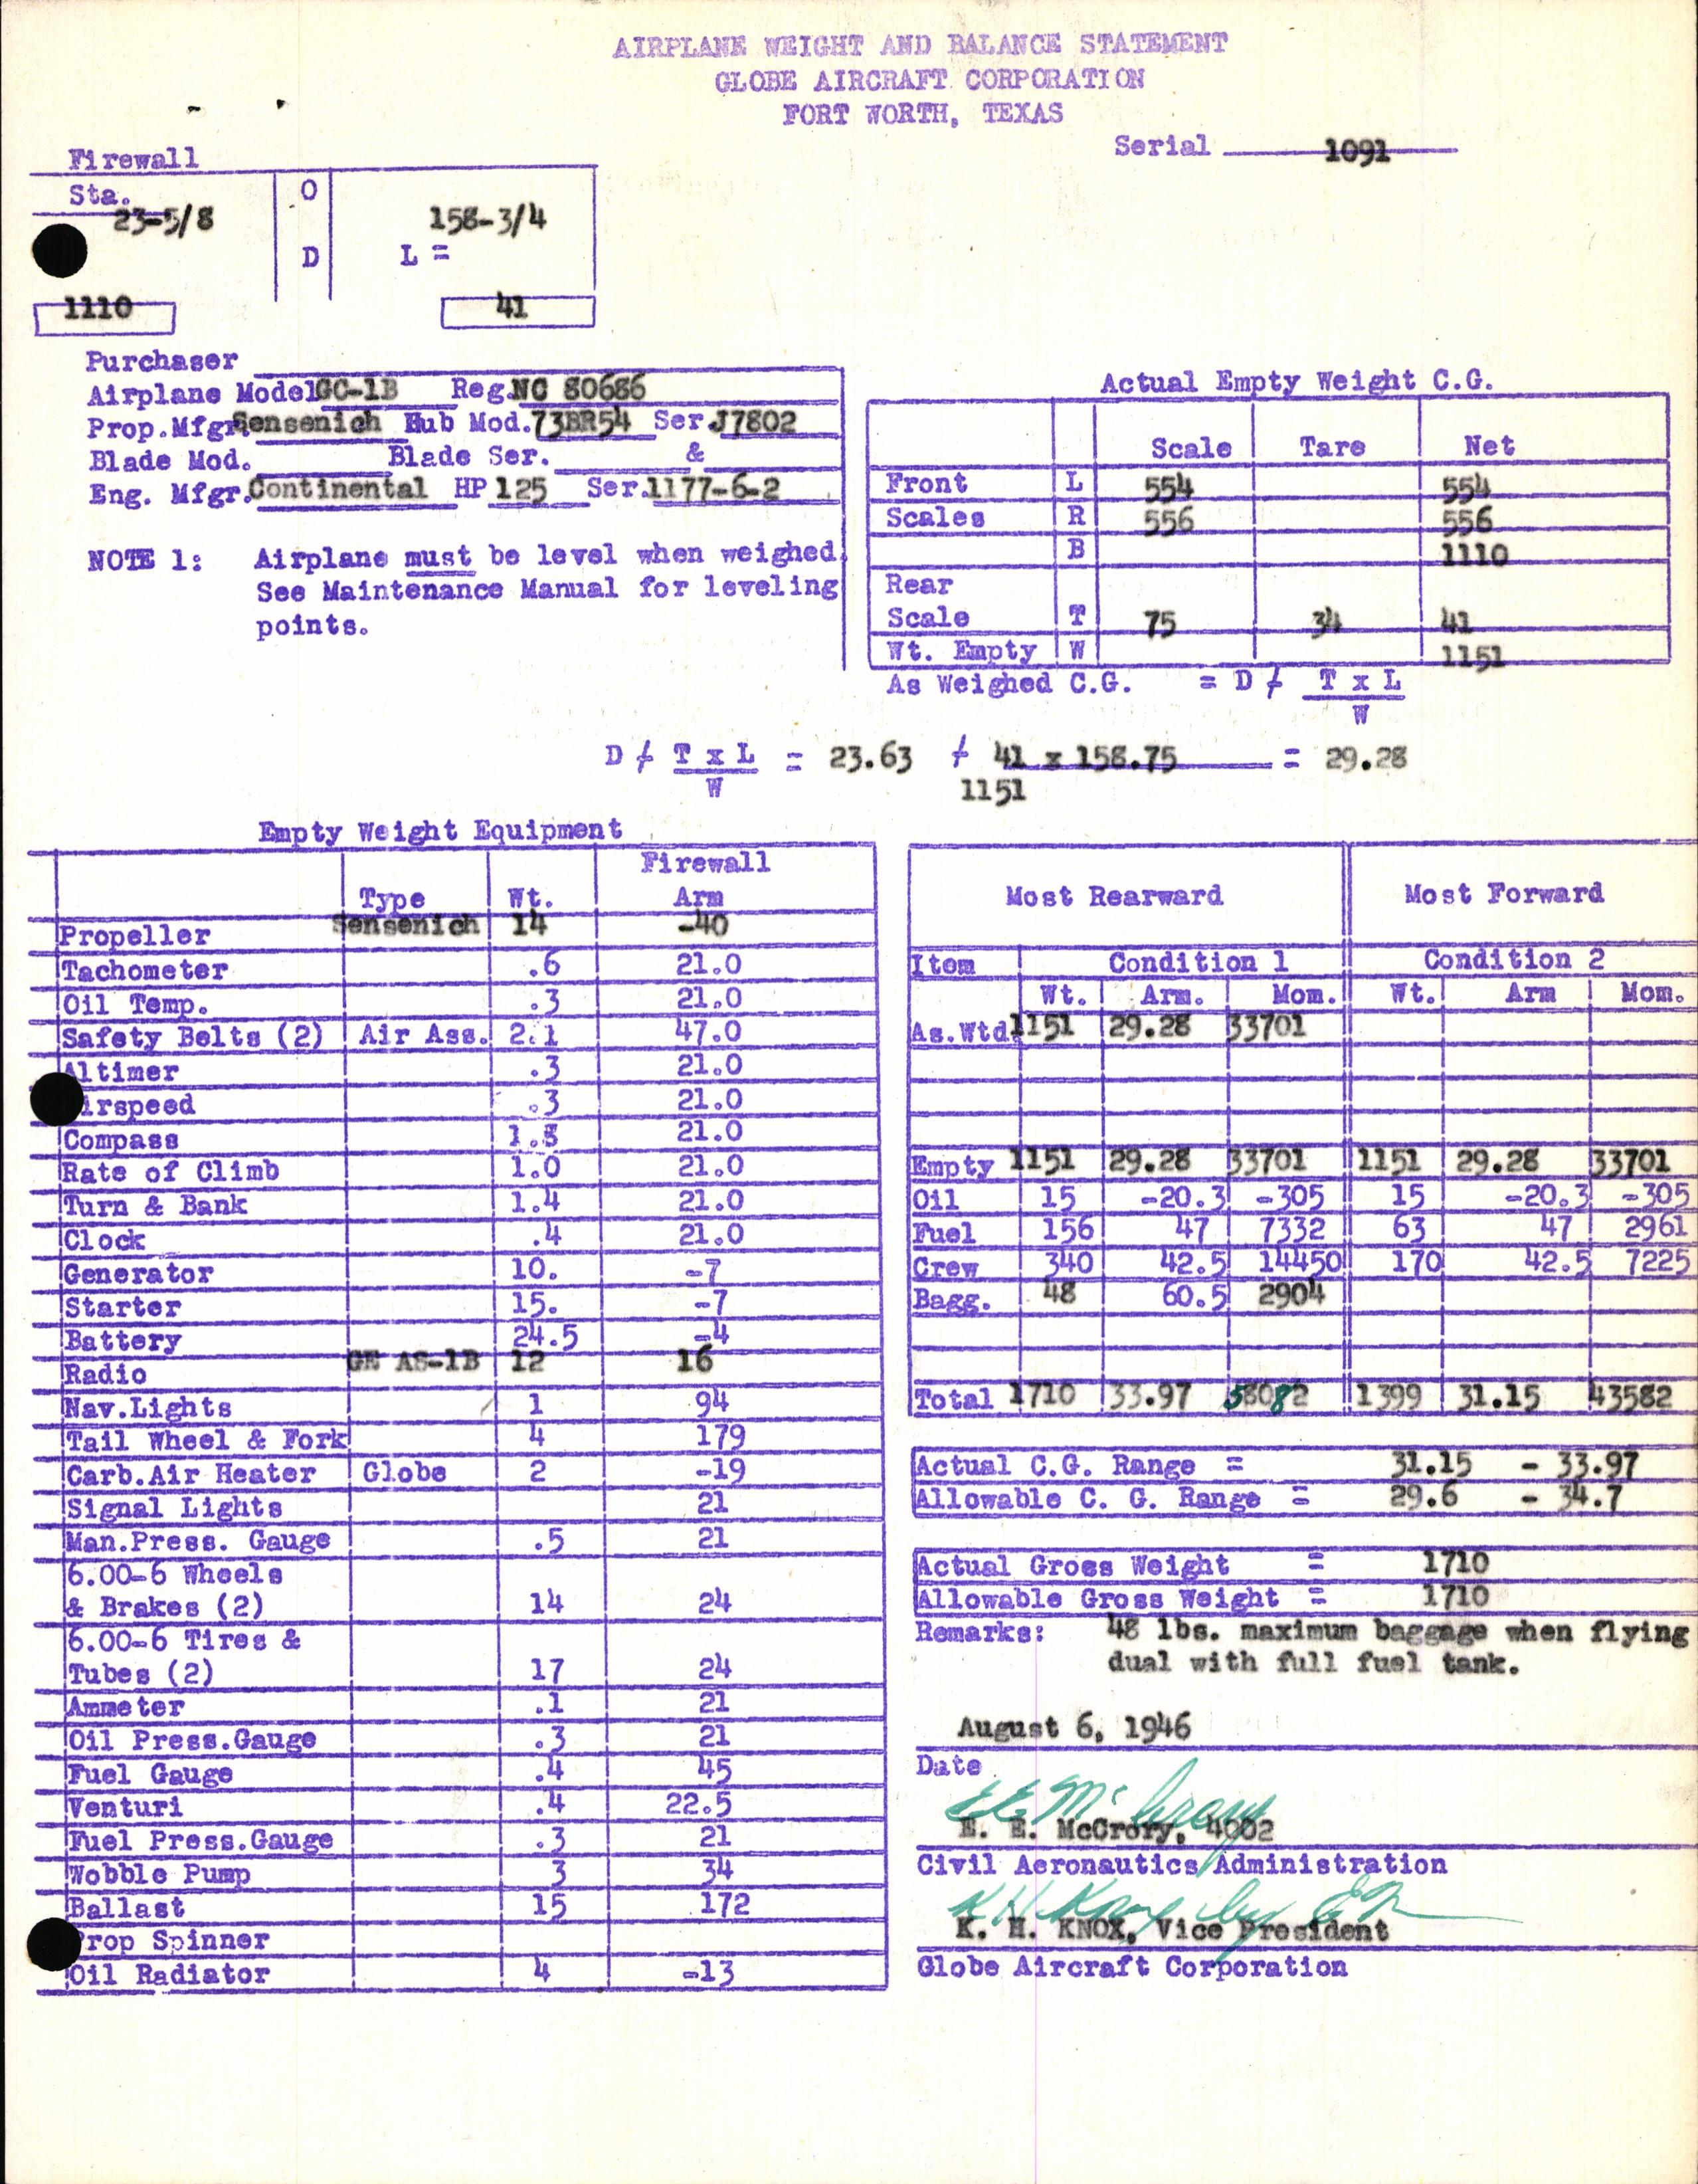 Sample page 7 from AirCorps Library document: Technical Information for Serial Number 1091